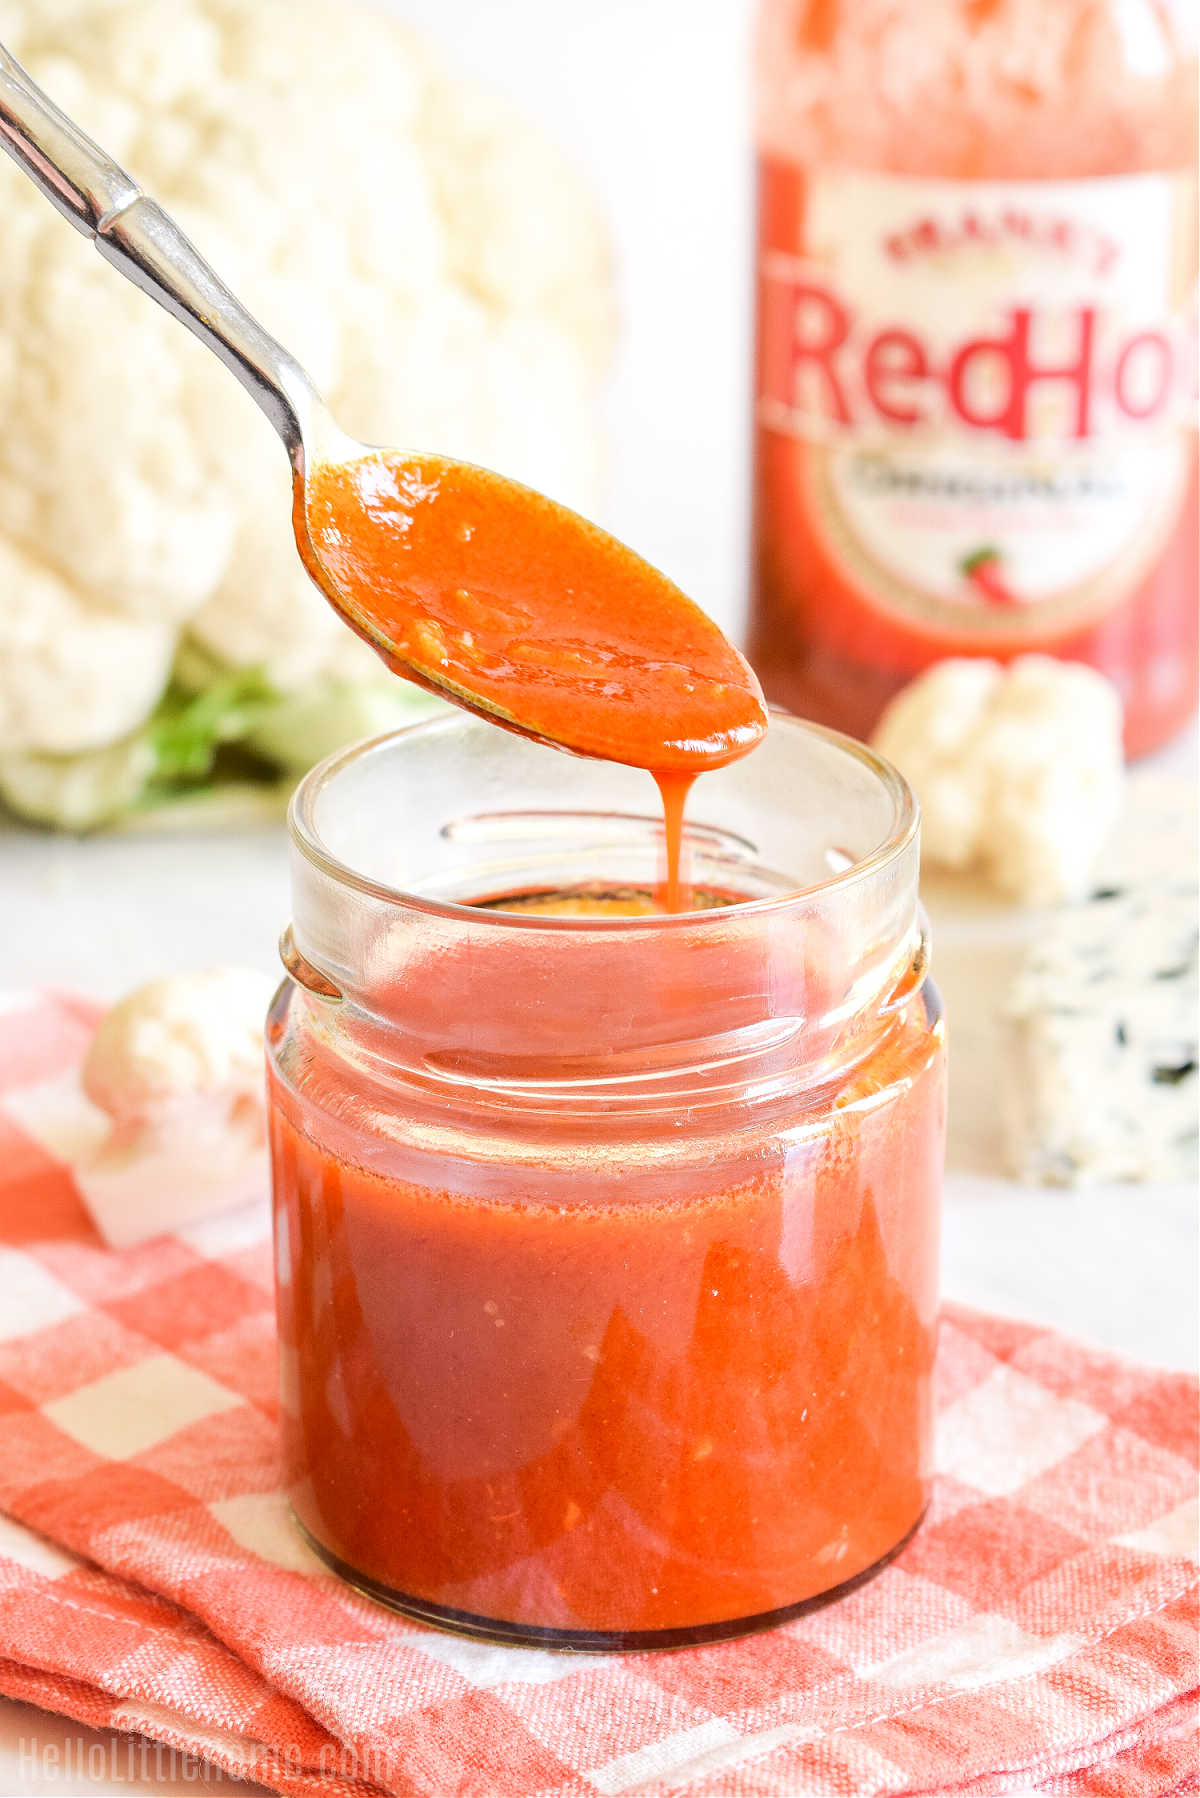 A spoon drizzling the finished sauce into a jar.